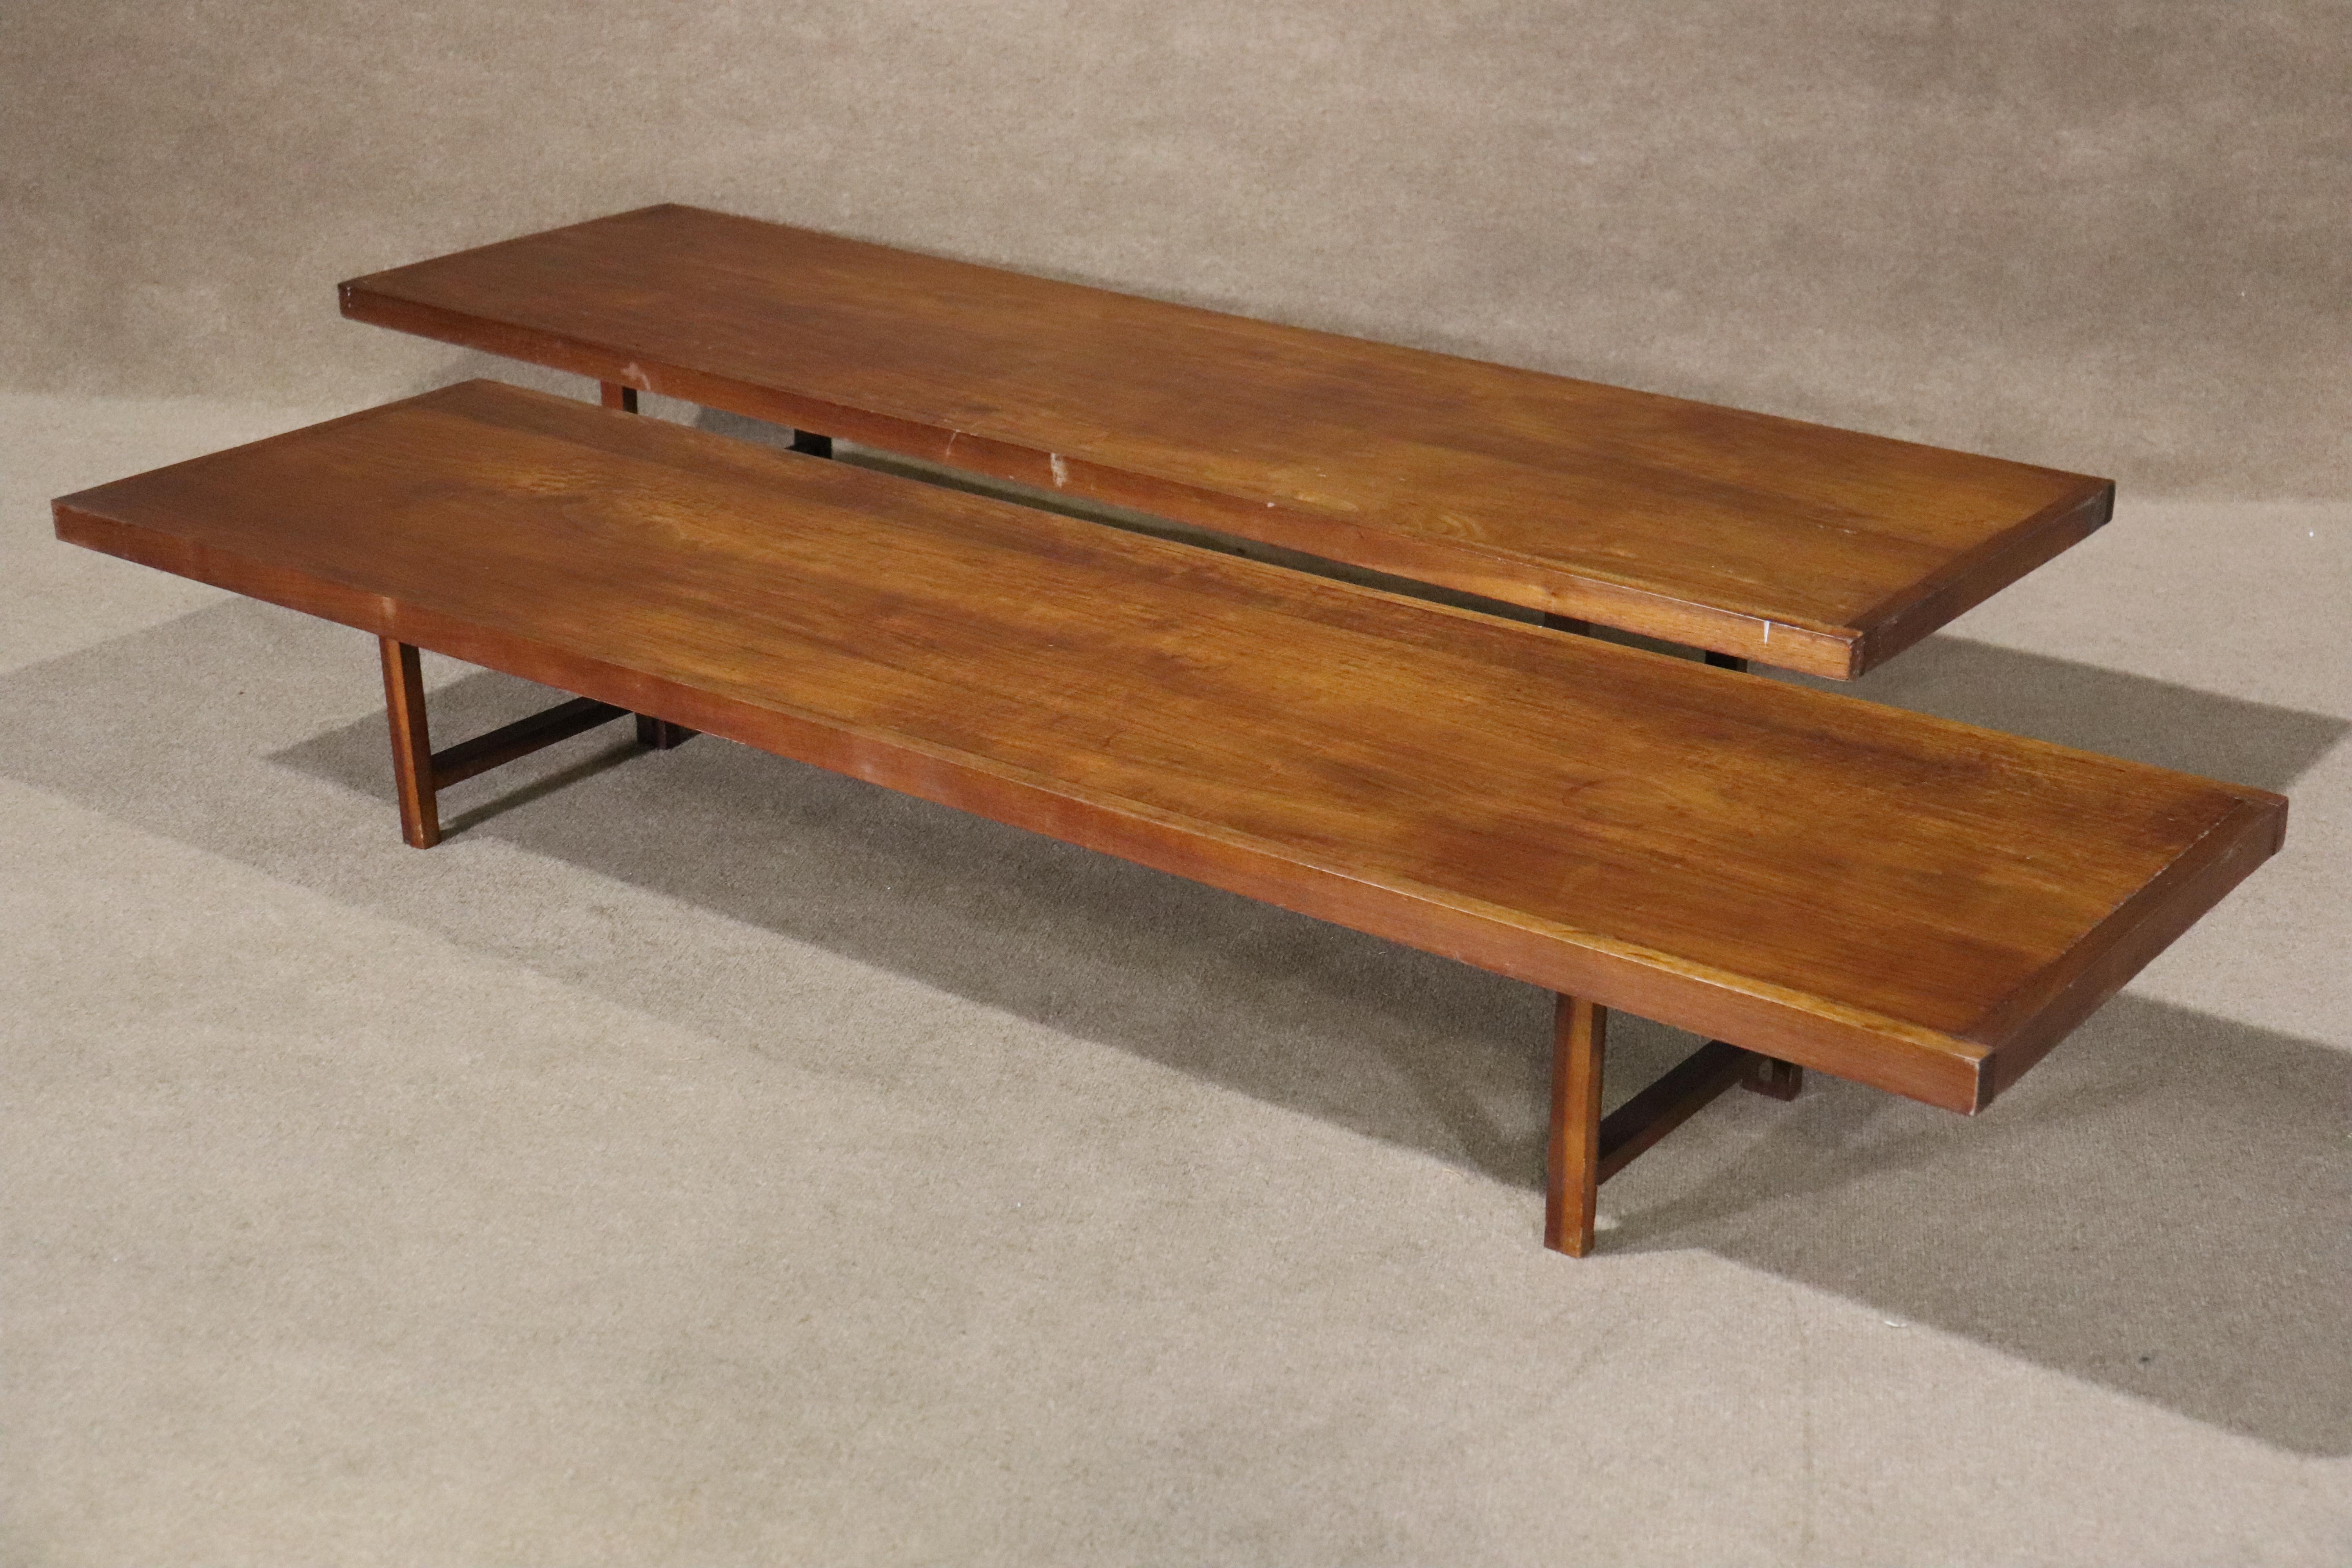 Extra long Danish coffee table. Very similar to the design of Torbjørn Afdal, this table is simple and handsome, with a single board and trestle-shaped legs.
Listing is for a single table.
Please confirm location NY or NJ